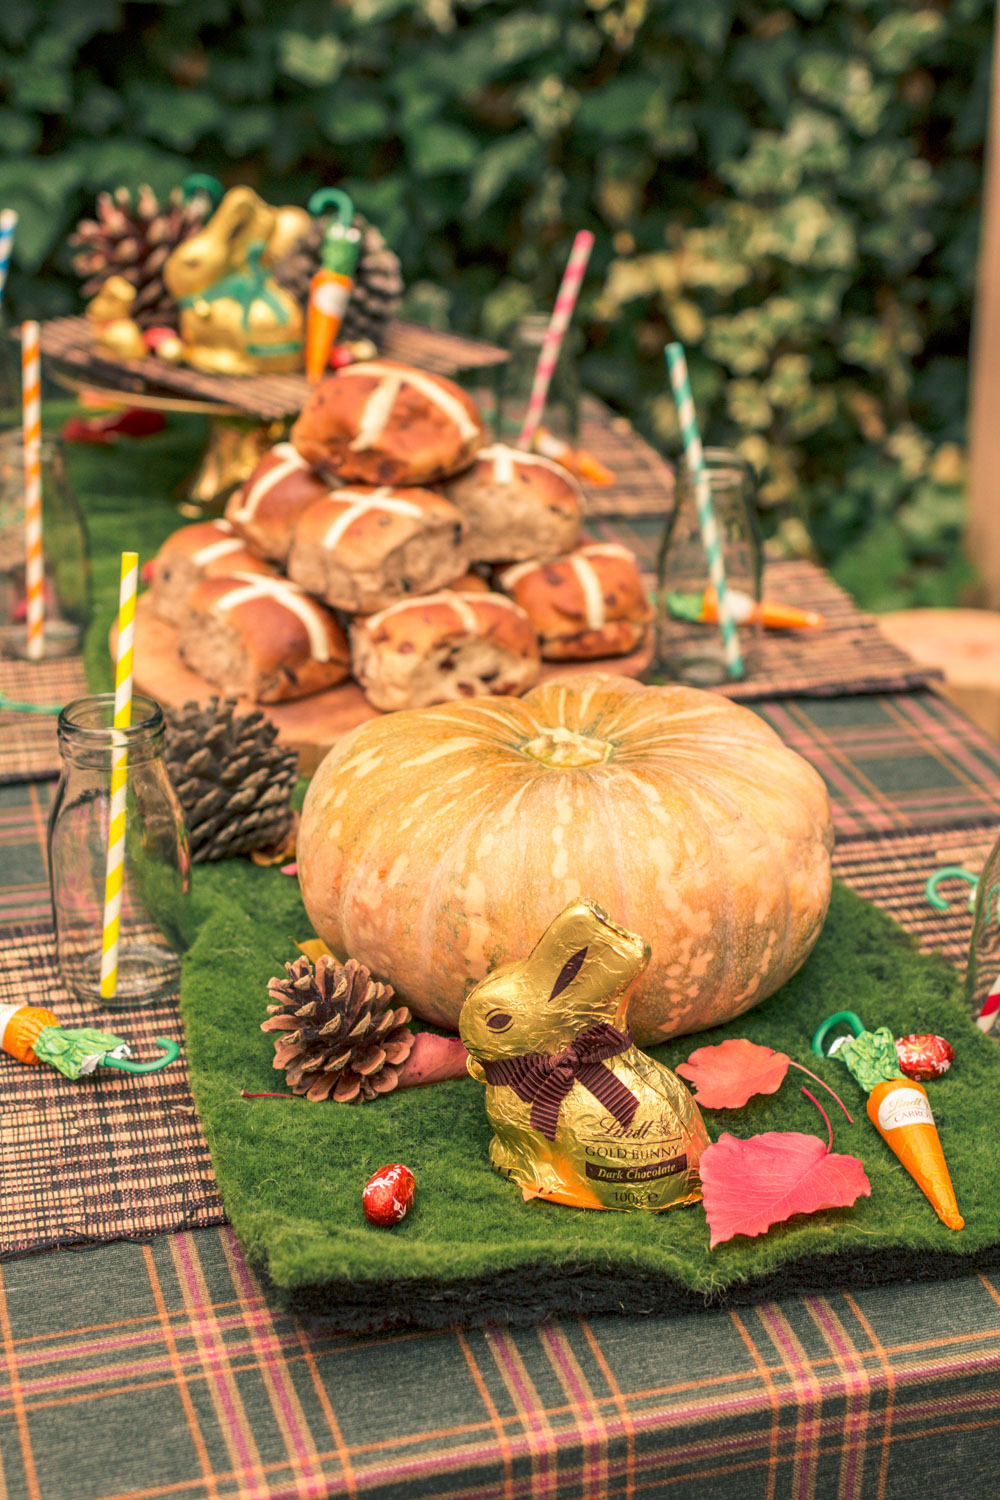 Autumn Easter Egg Hunt Childrens Table decorated with Pumpkins, pinecones, chocolate bunnies, chocolate carrots, mini milk bottles and hot cross buns